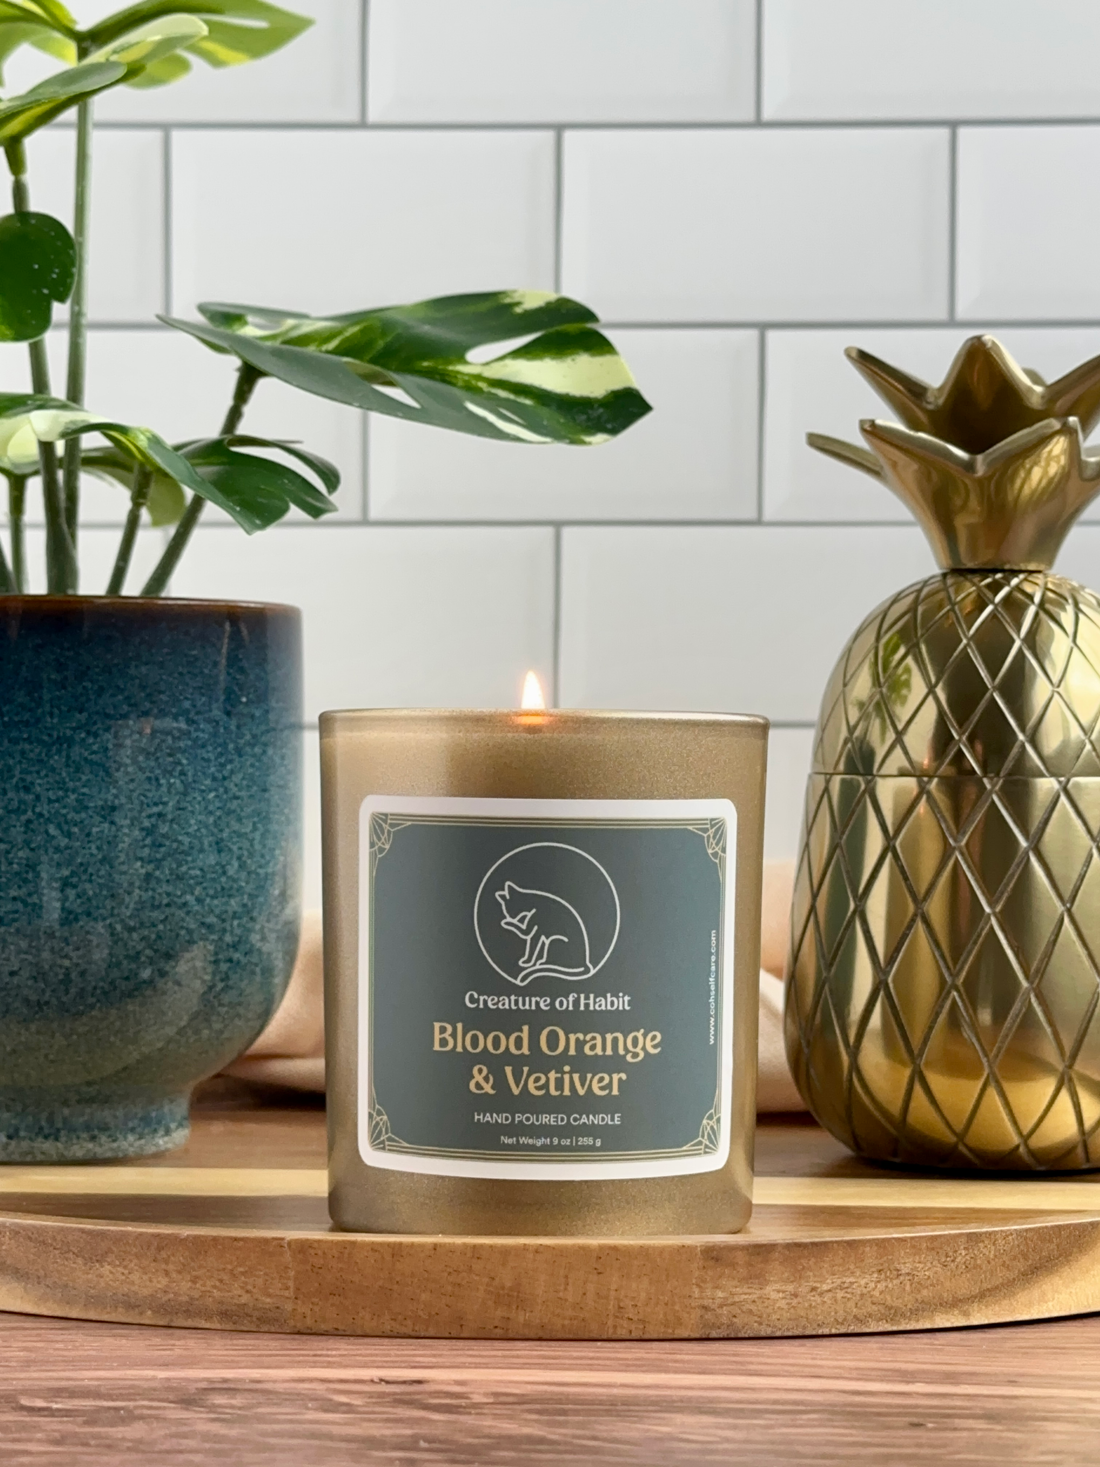 A lit soy candle within a golden vessel is placed on top of a wooden tray, next to a small houseplant and golden pineapple paperweight. The label is greyish cyan featuring the logo of a white cat silhouette, the name of the company Creature of Habit, and the scent name Blood Orange &amp; Vetiver.